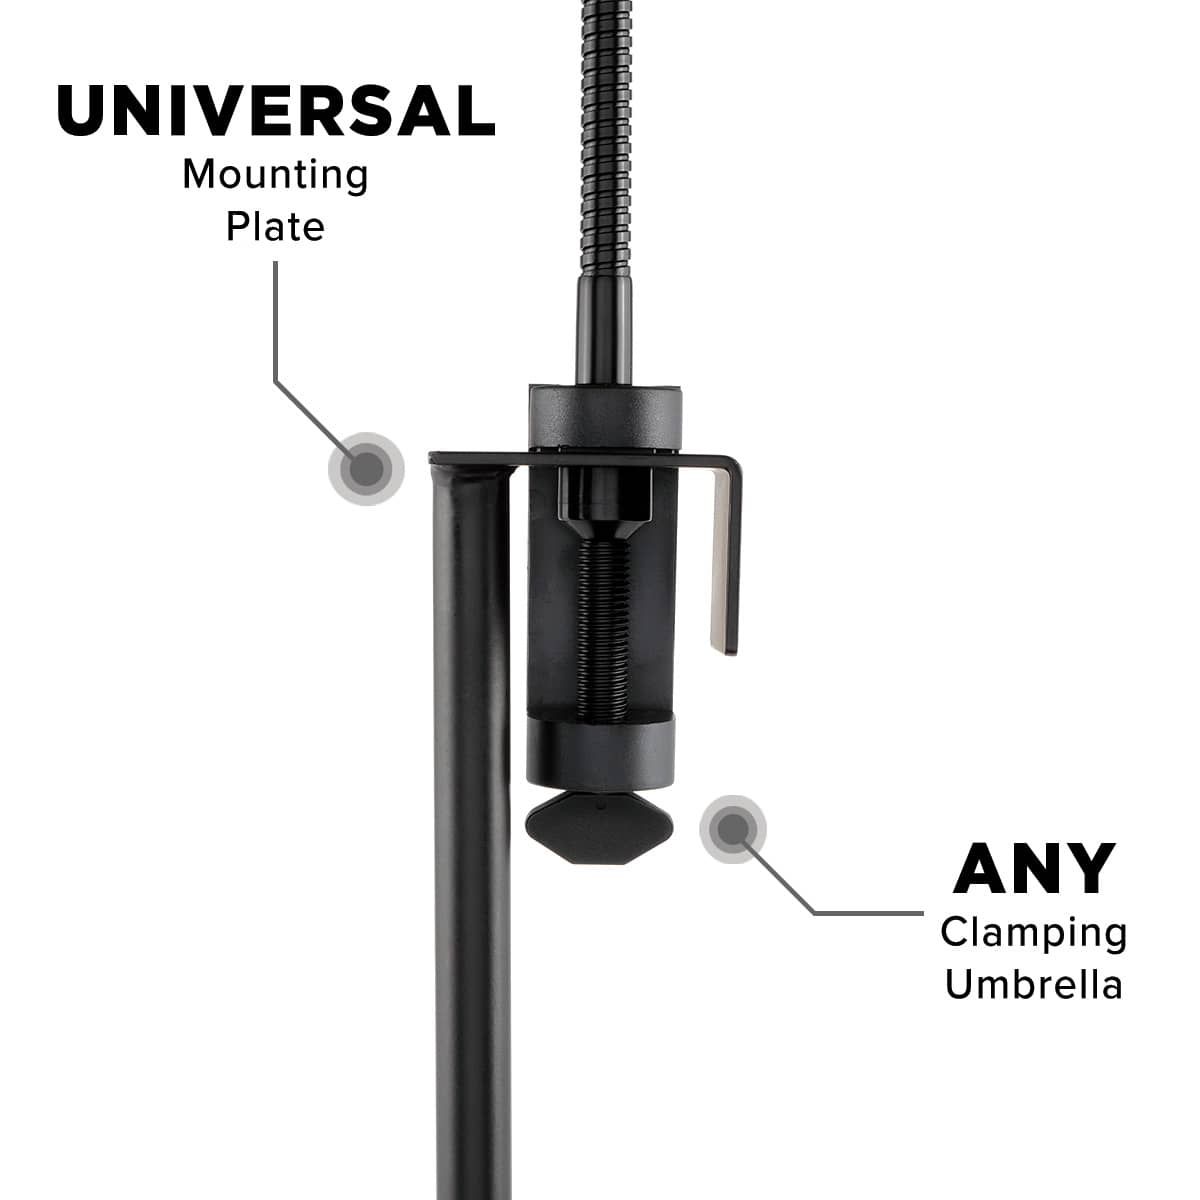 Universal Mounting plate, clams to pole as well